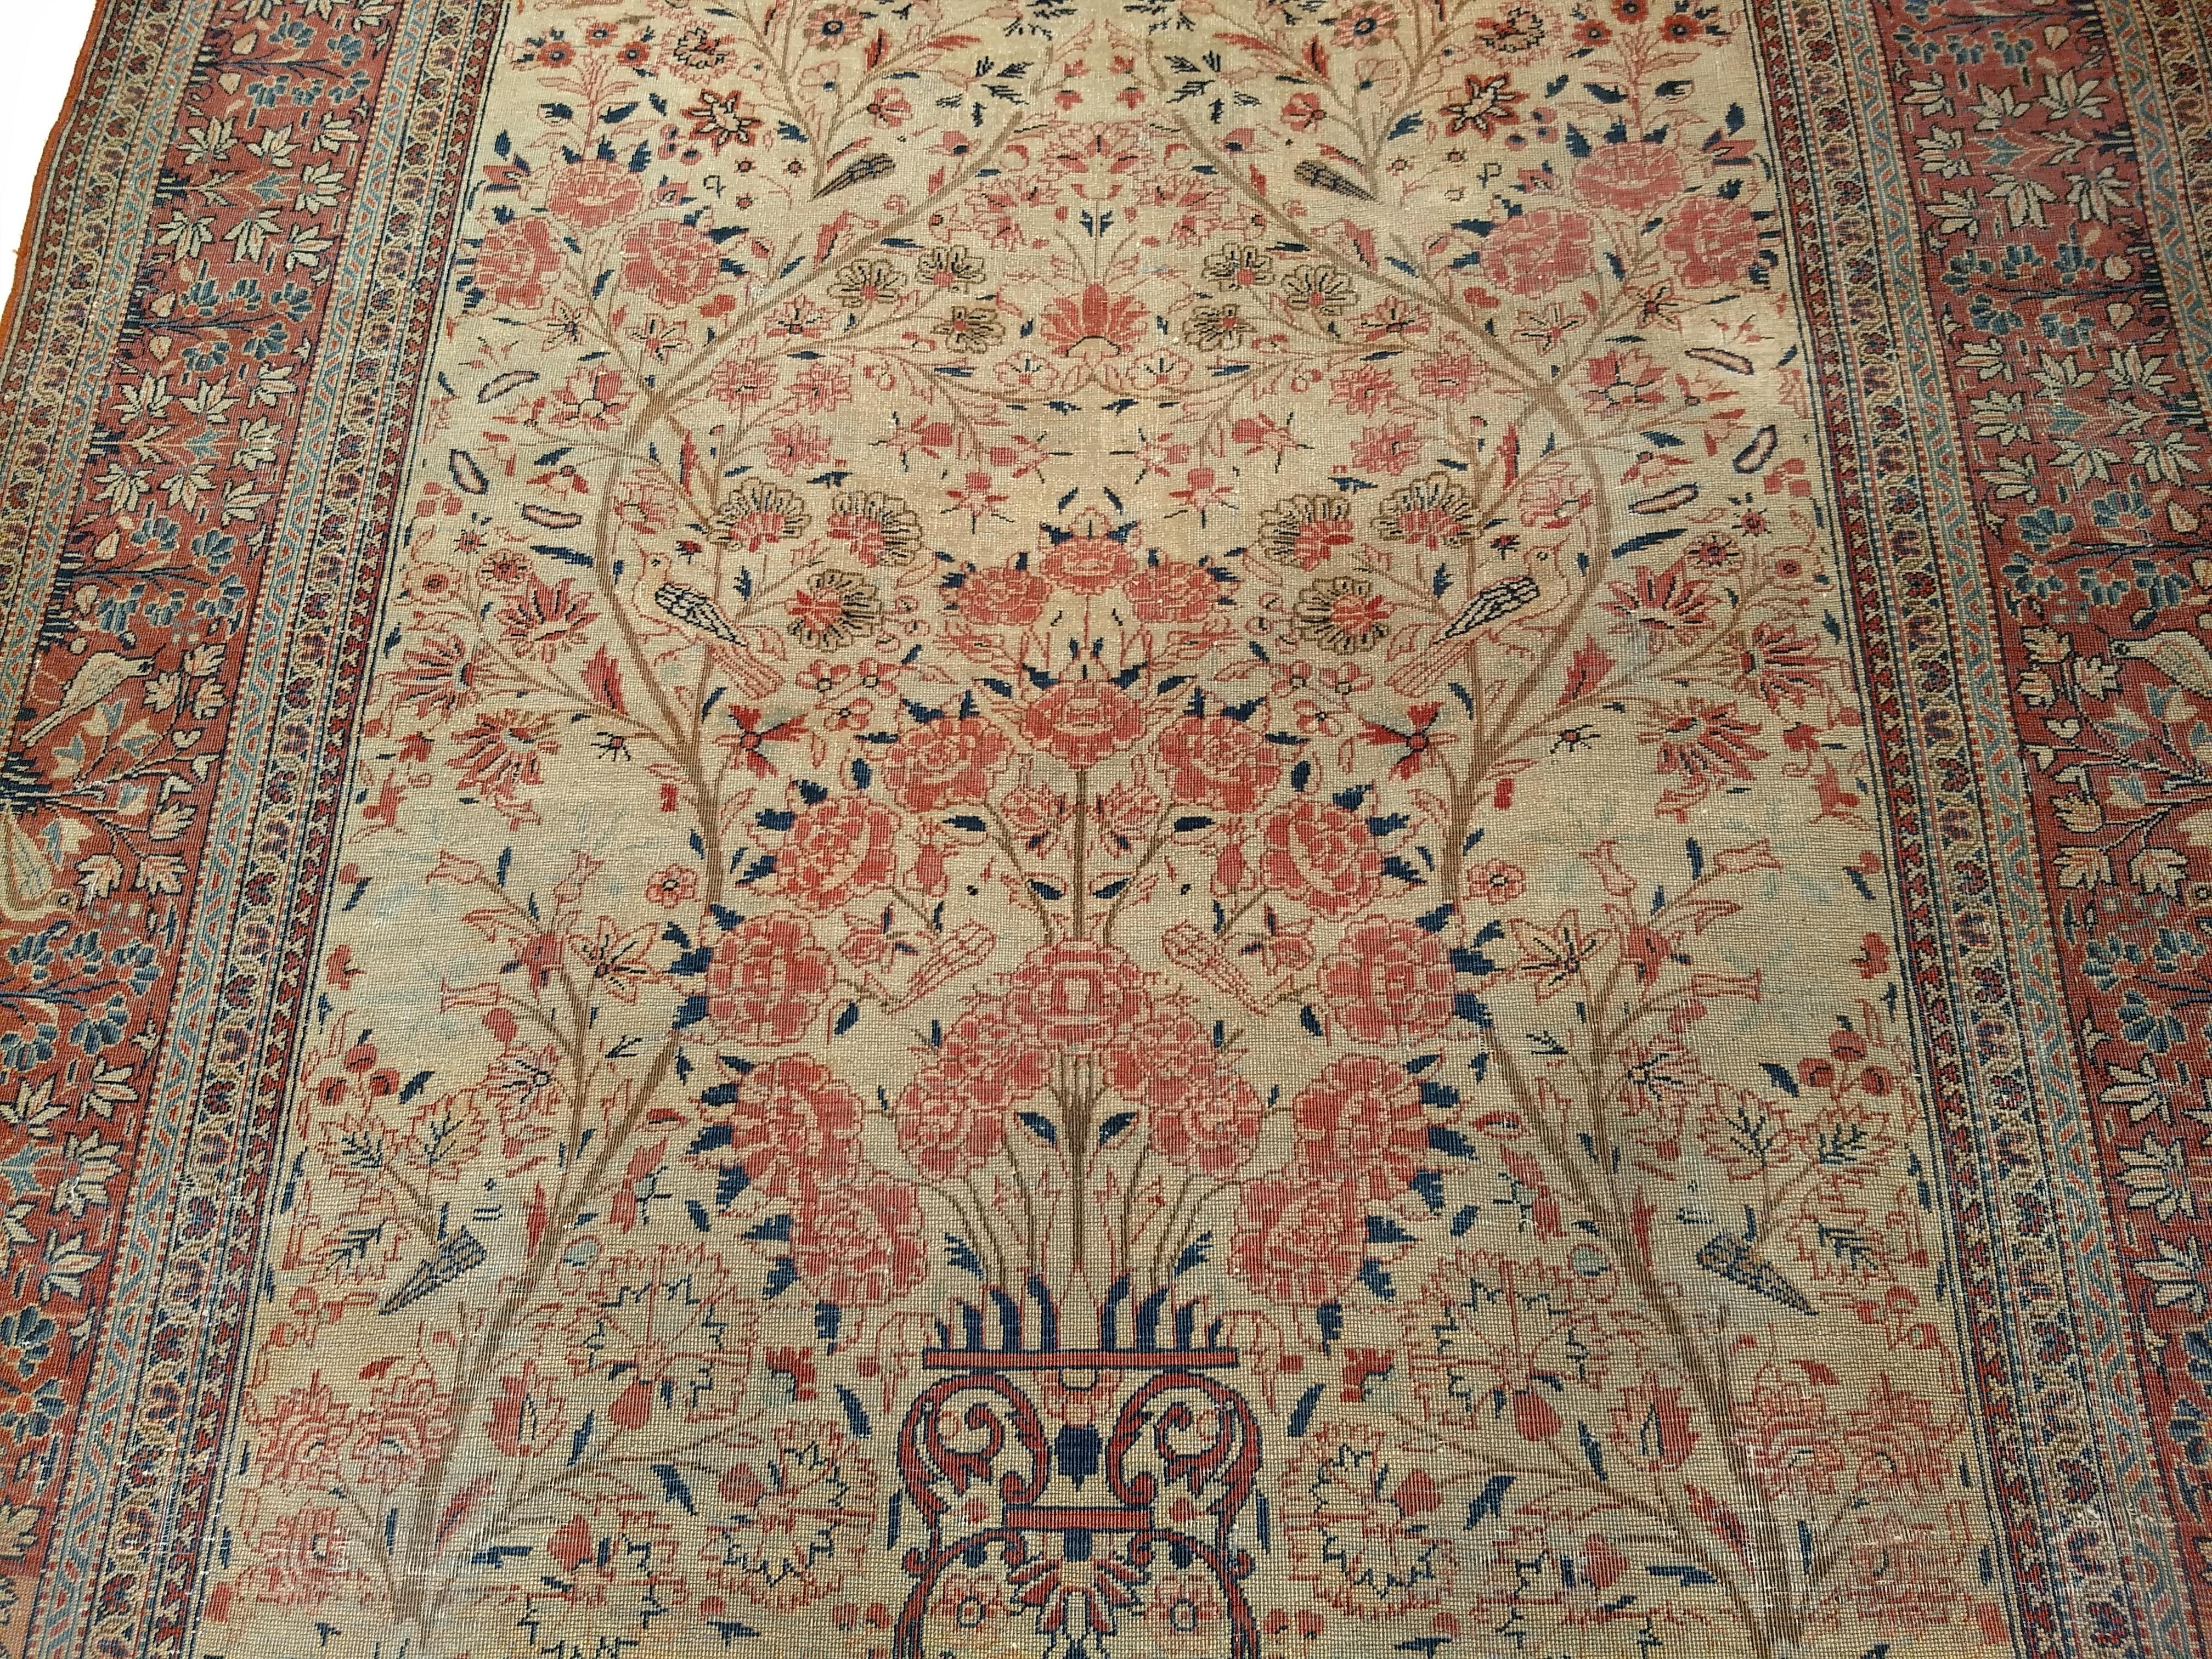 19th Century Persian Kashan “Tree of Life” Vase Rug in Ivory, Brick Red, Navy For Sale 3